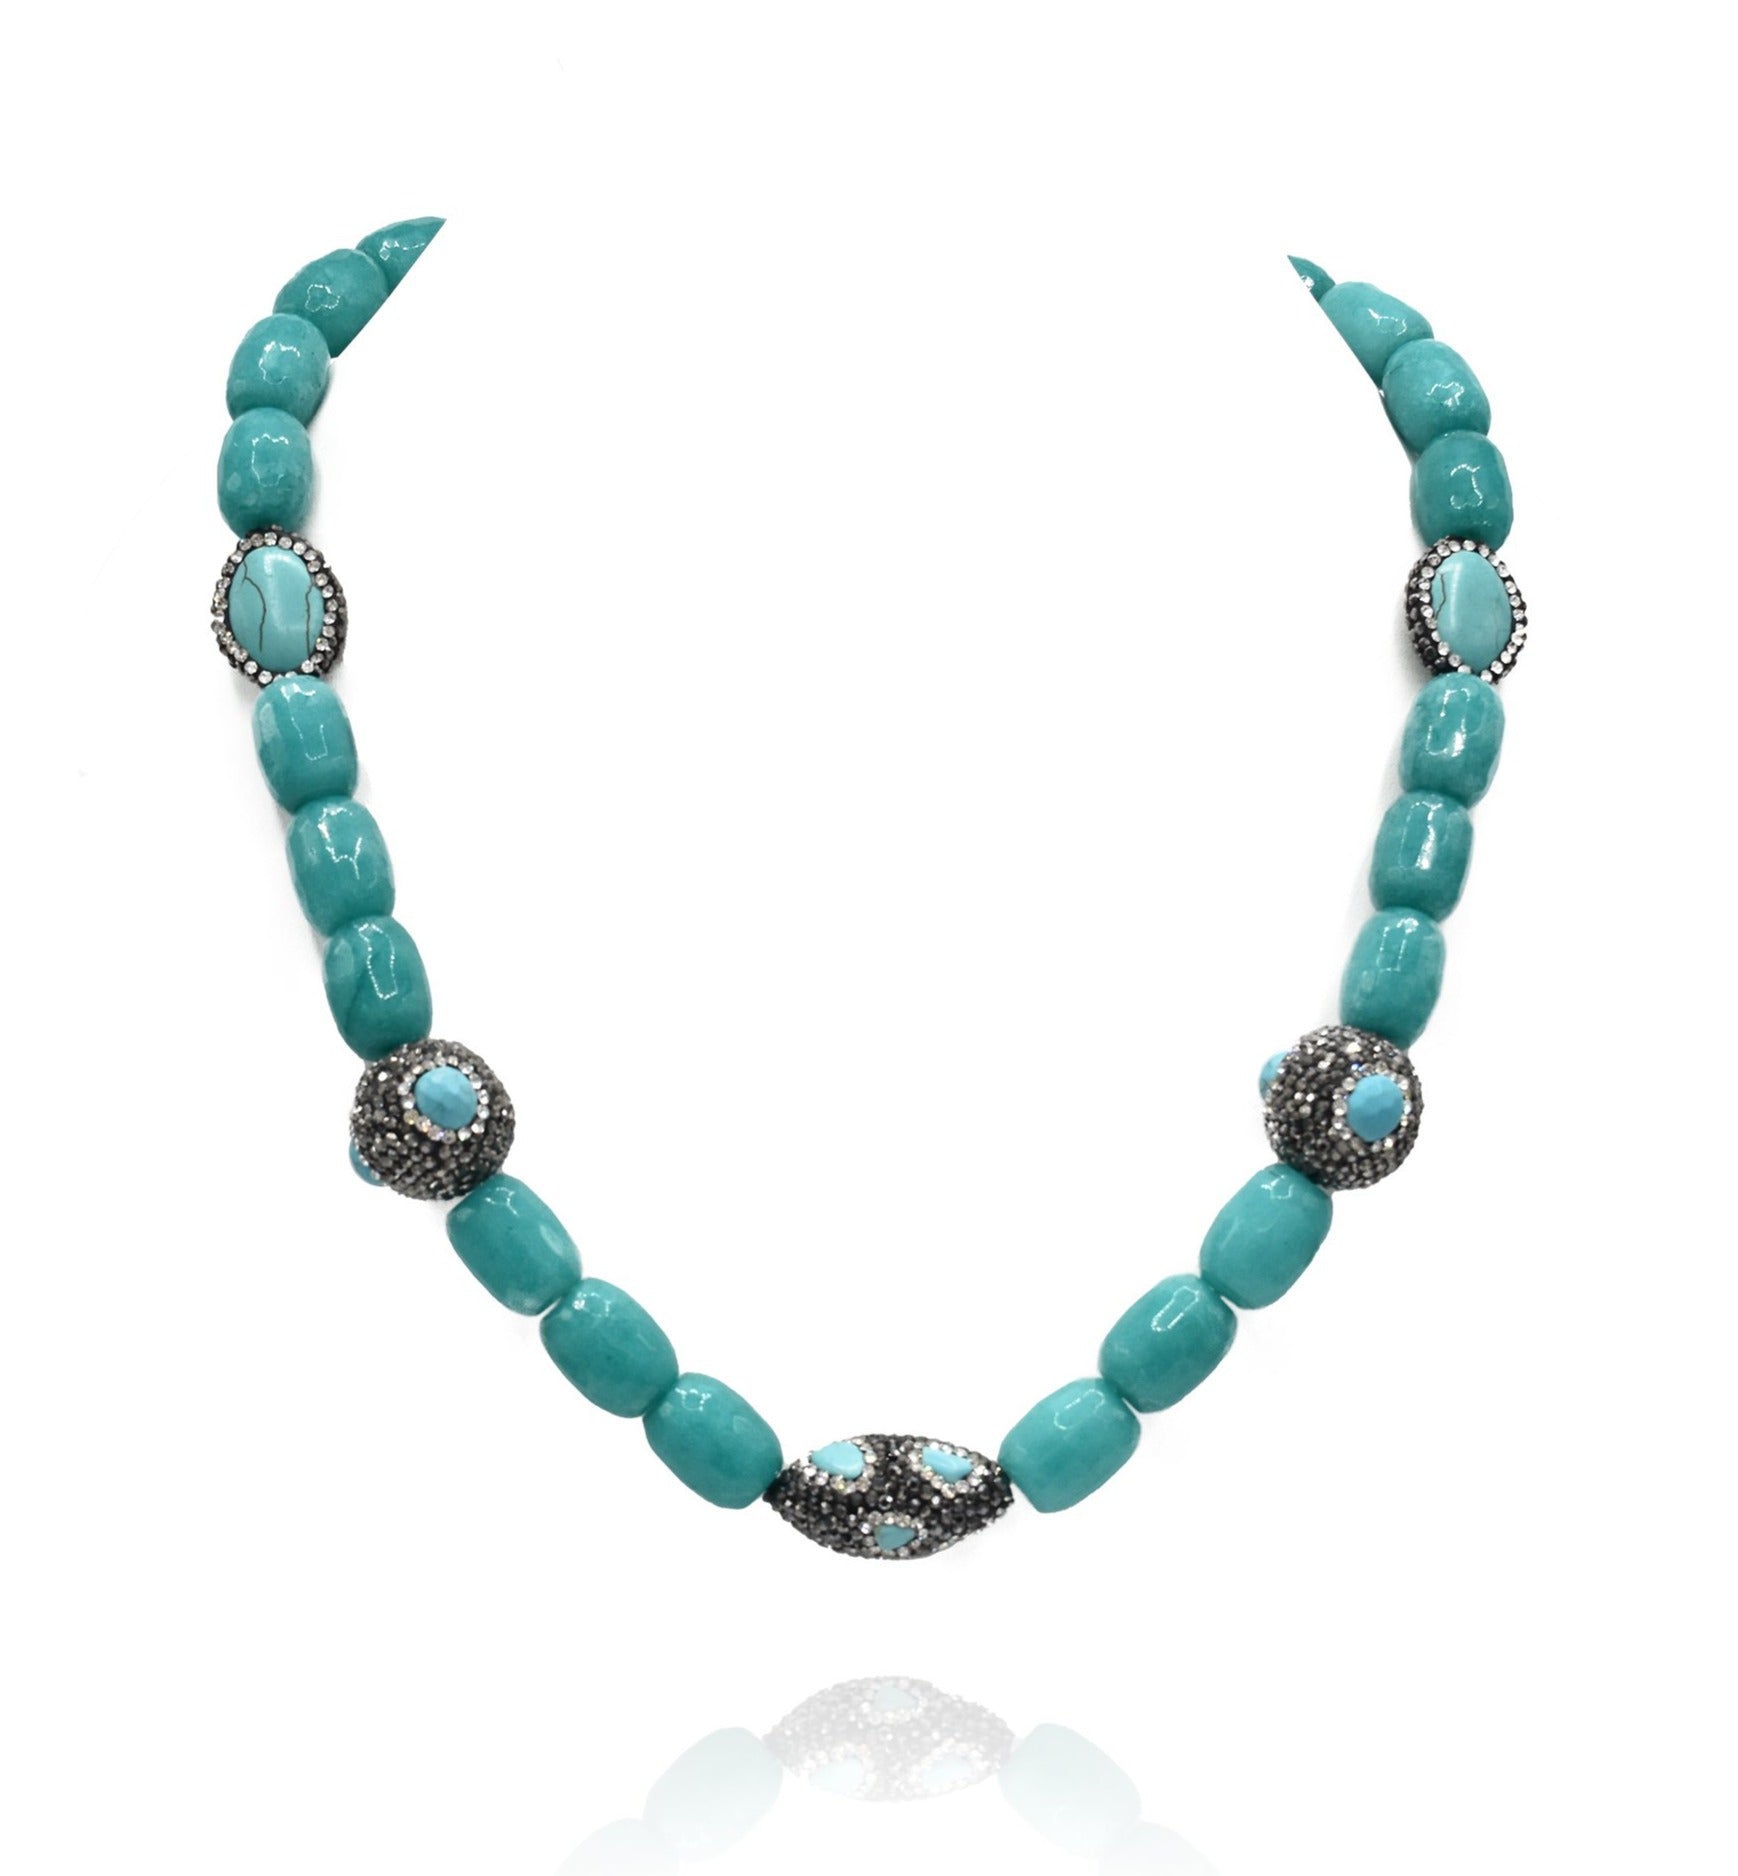 Adley Teal Color Stone Beads Necklace - The Pashm